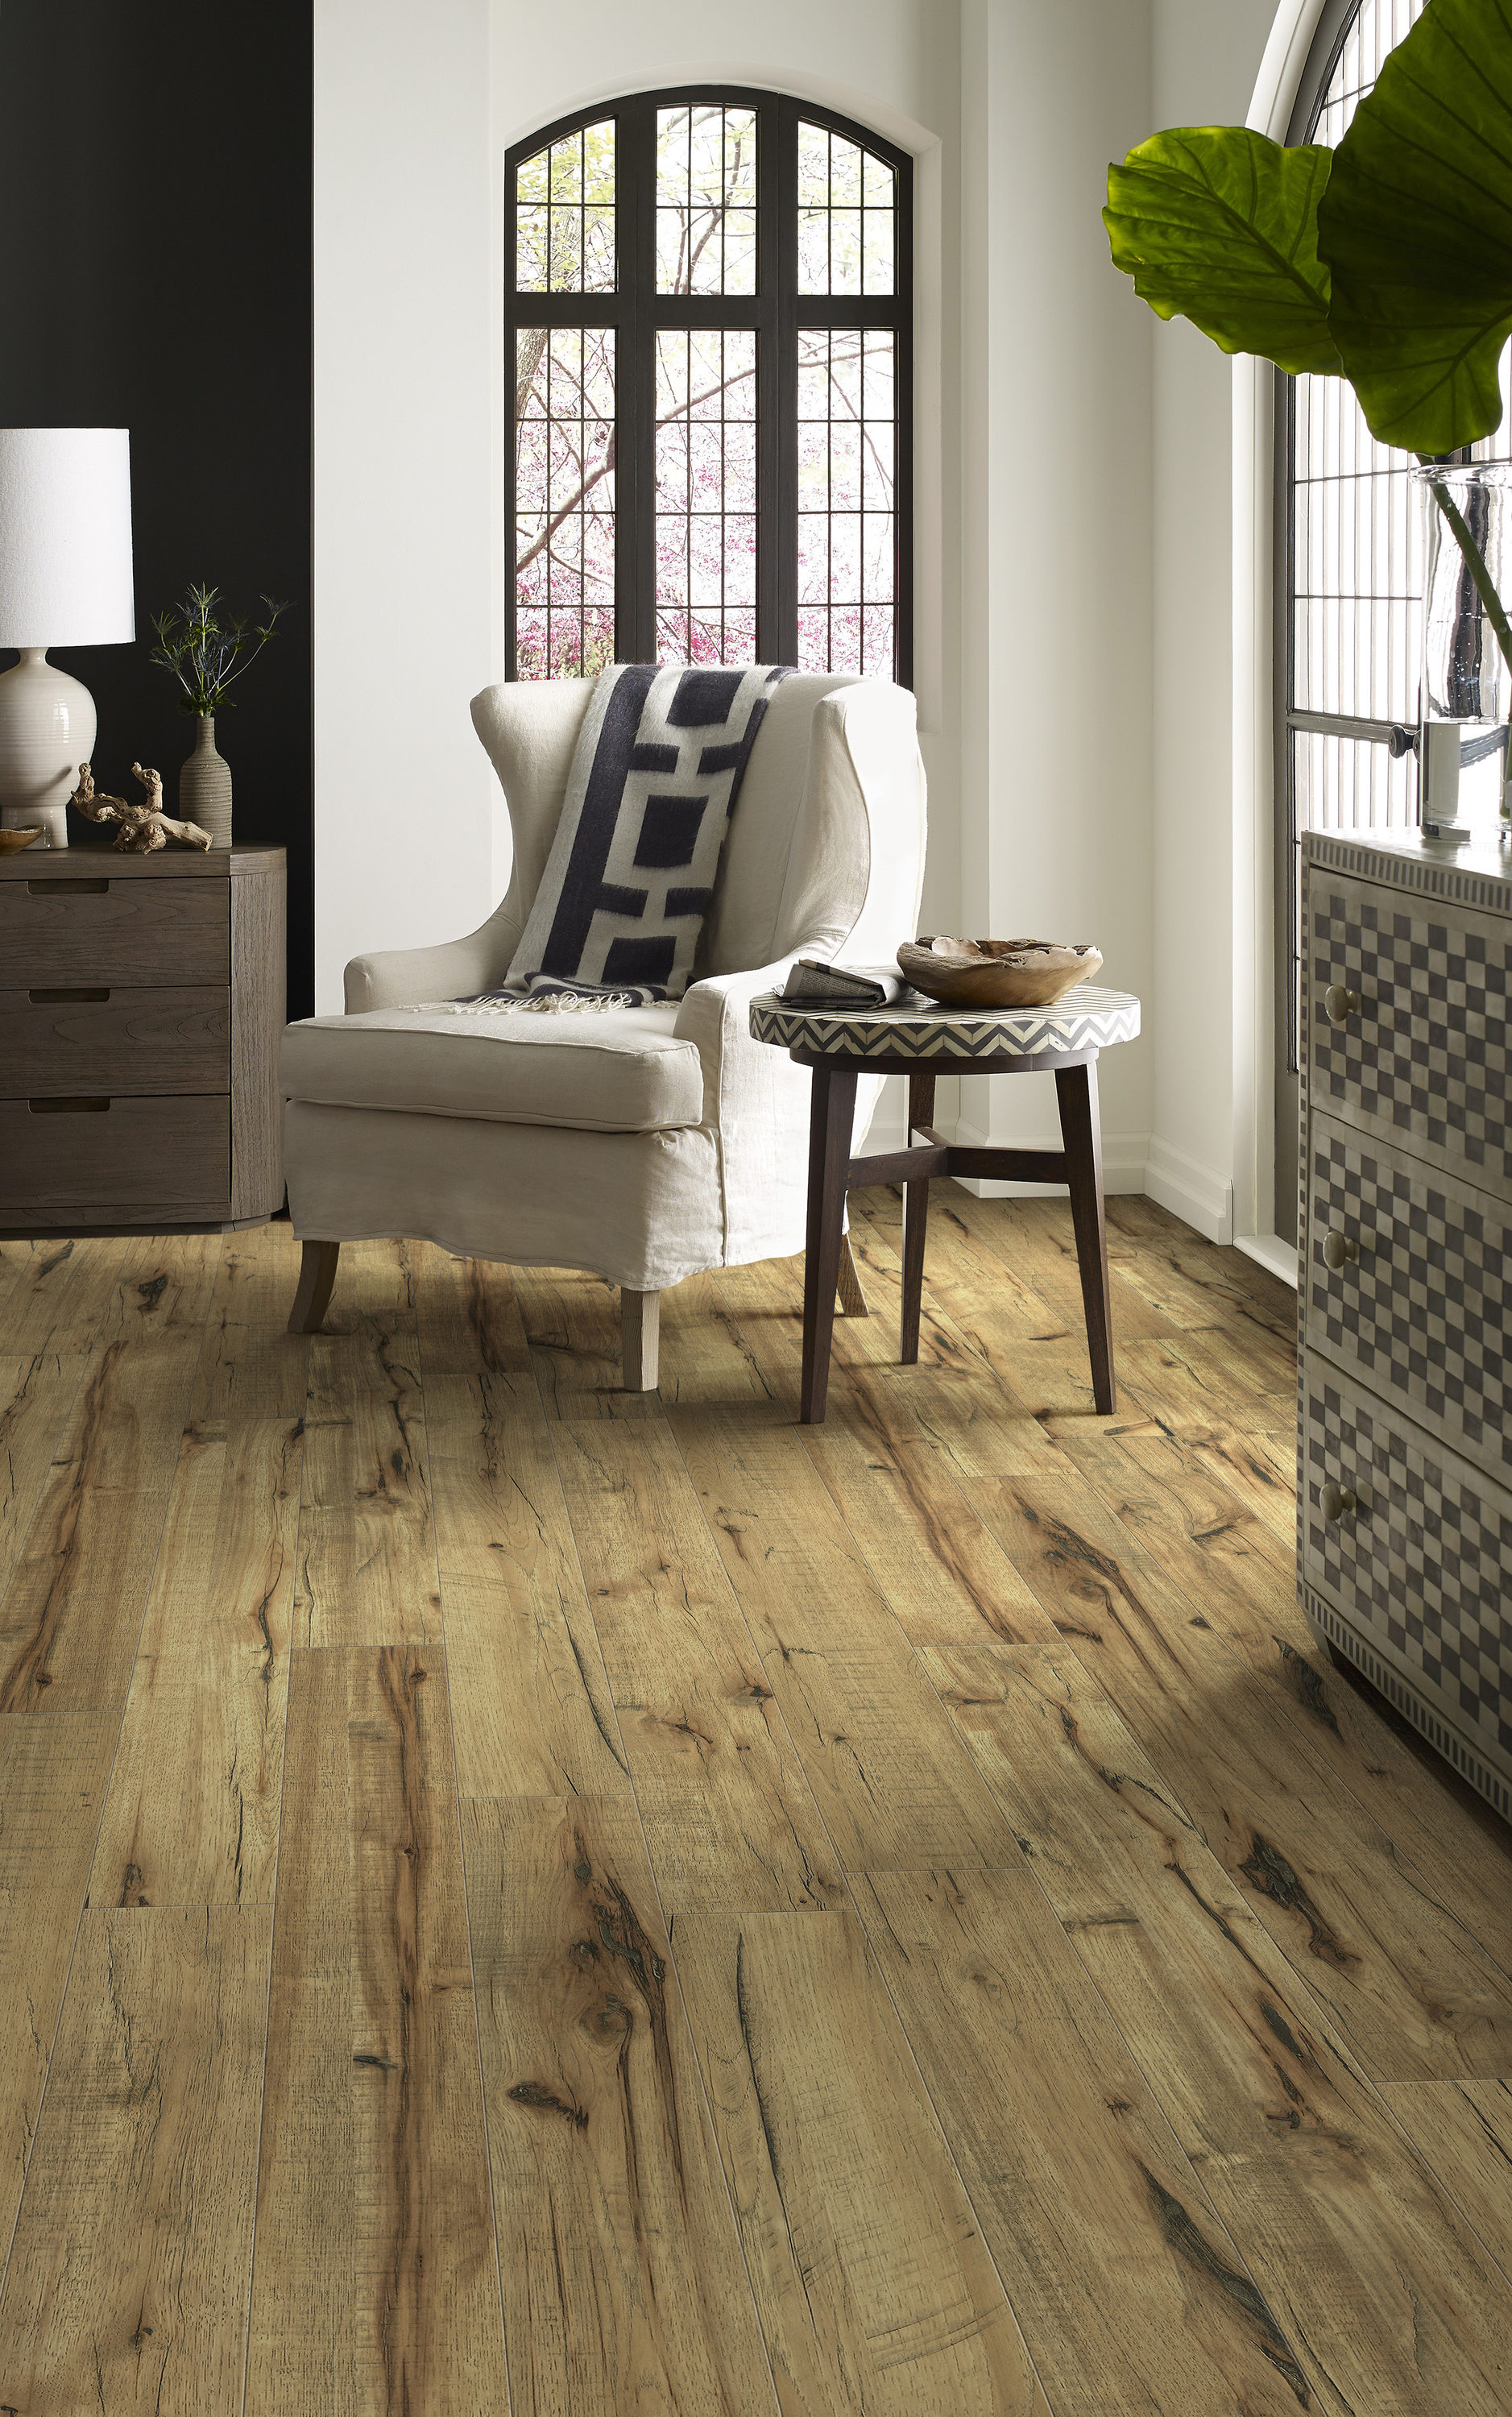 Style Selections Ssp Antique Hickory 25, Style Selections Laminate Flooring Antique Hickory